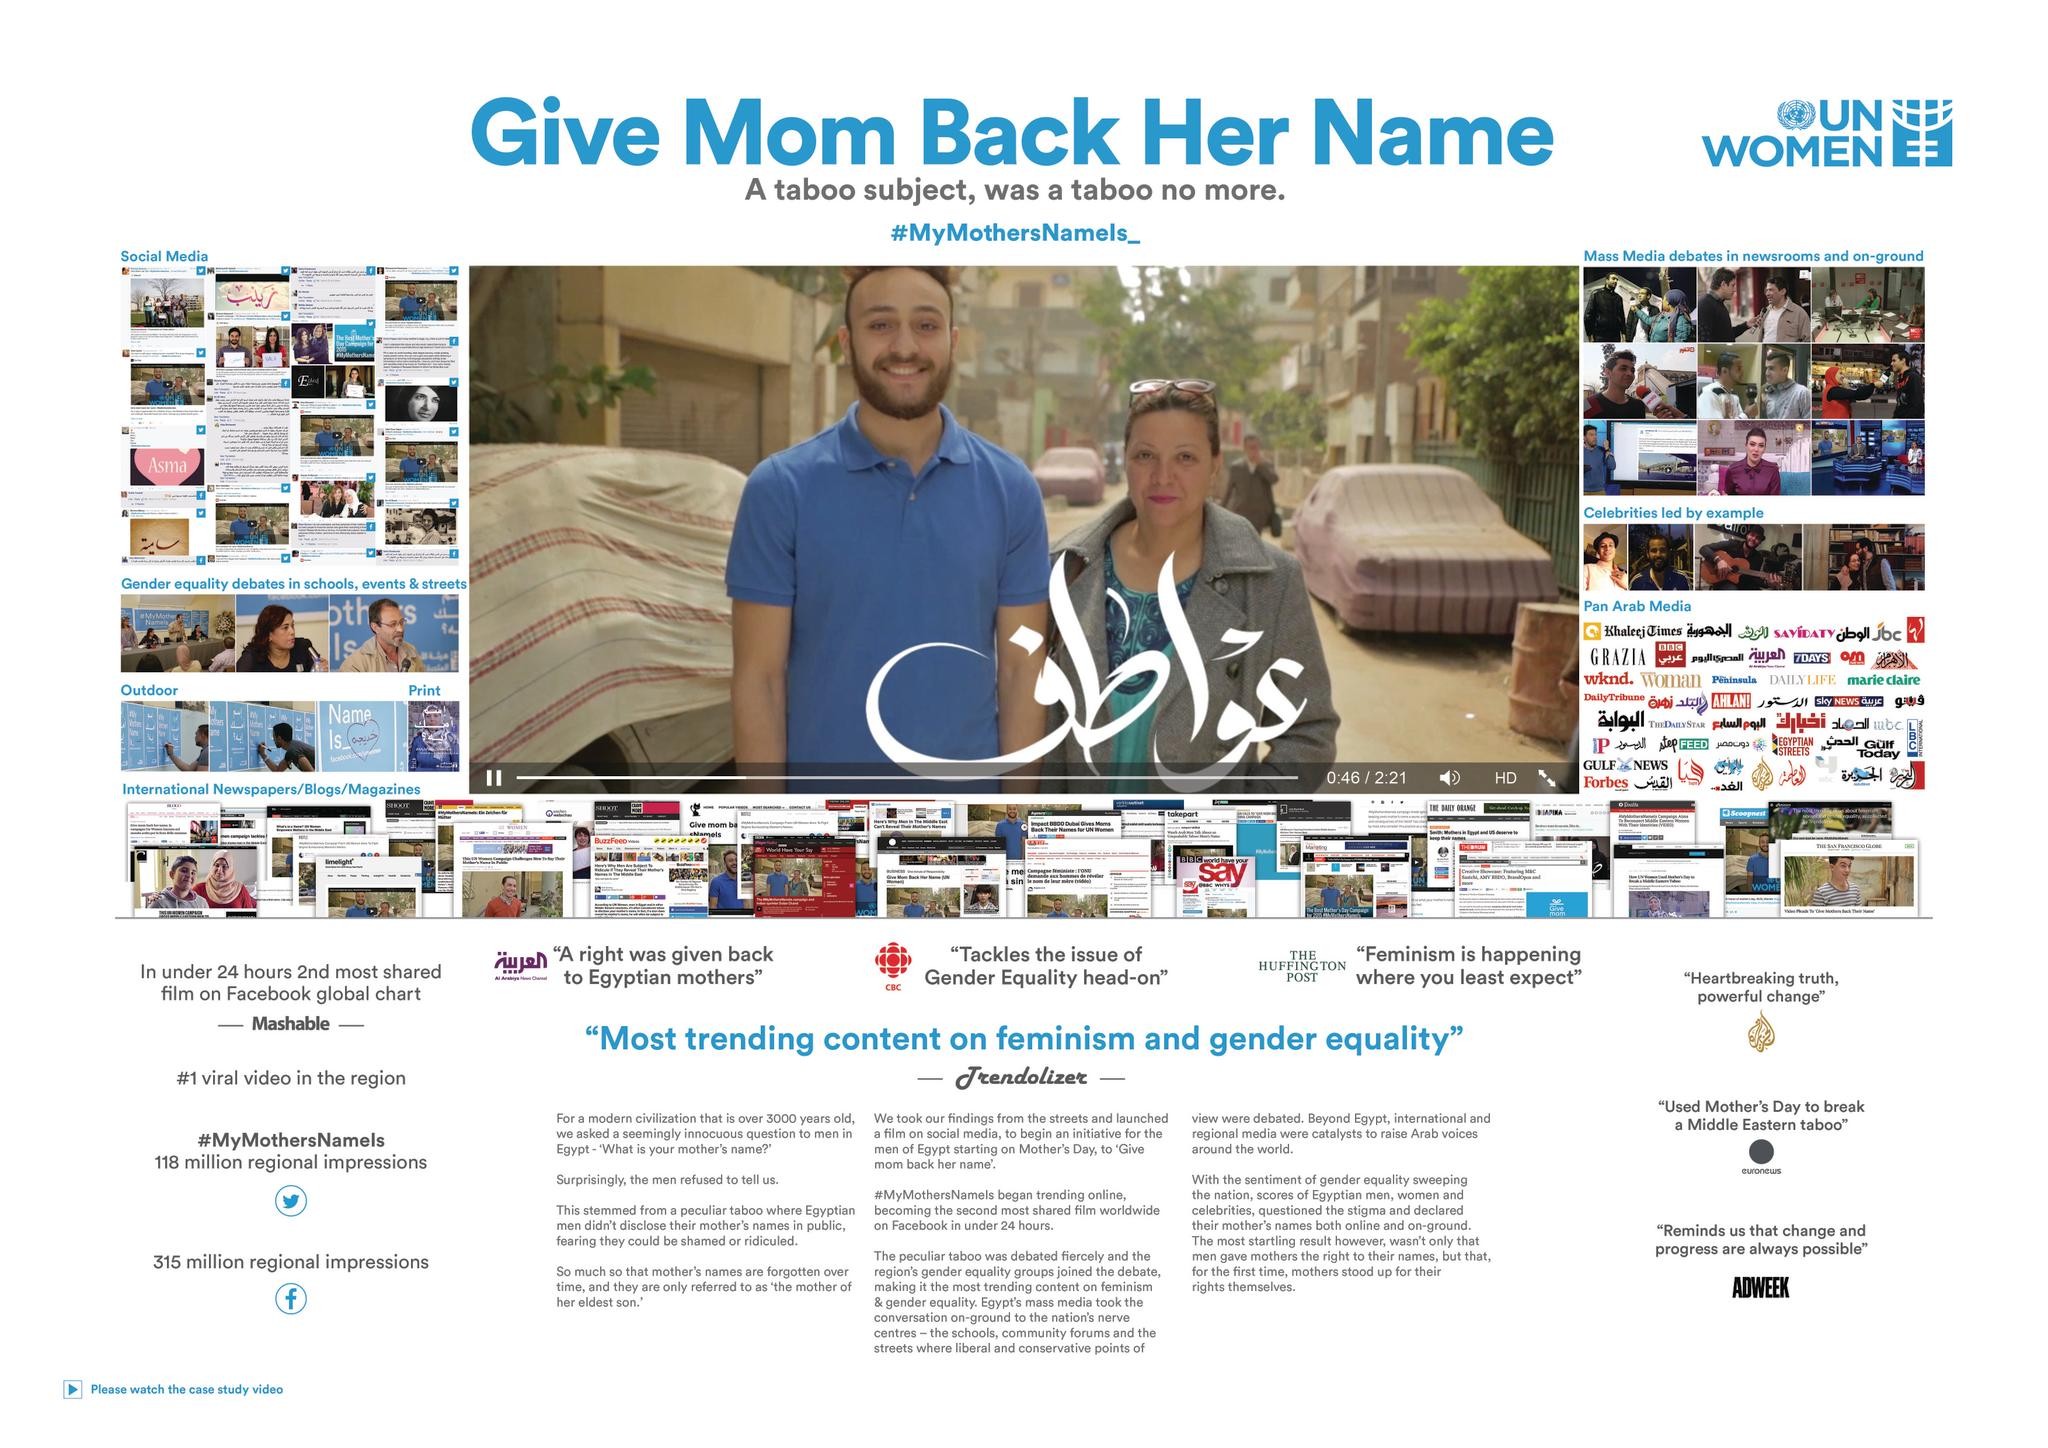 GIVE MOM BACK HER NAME